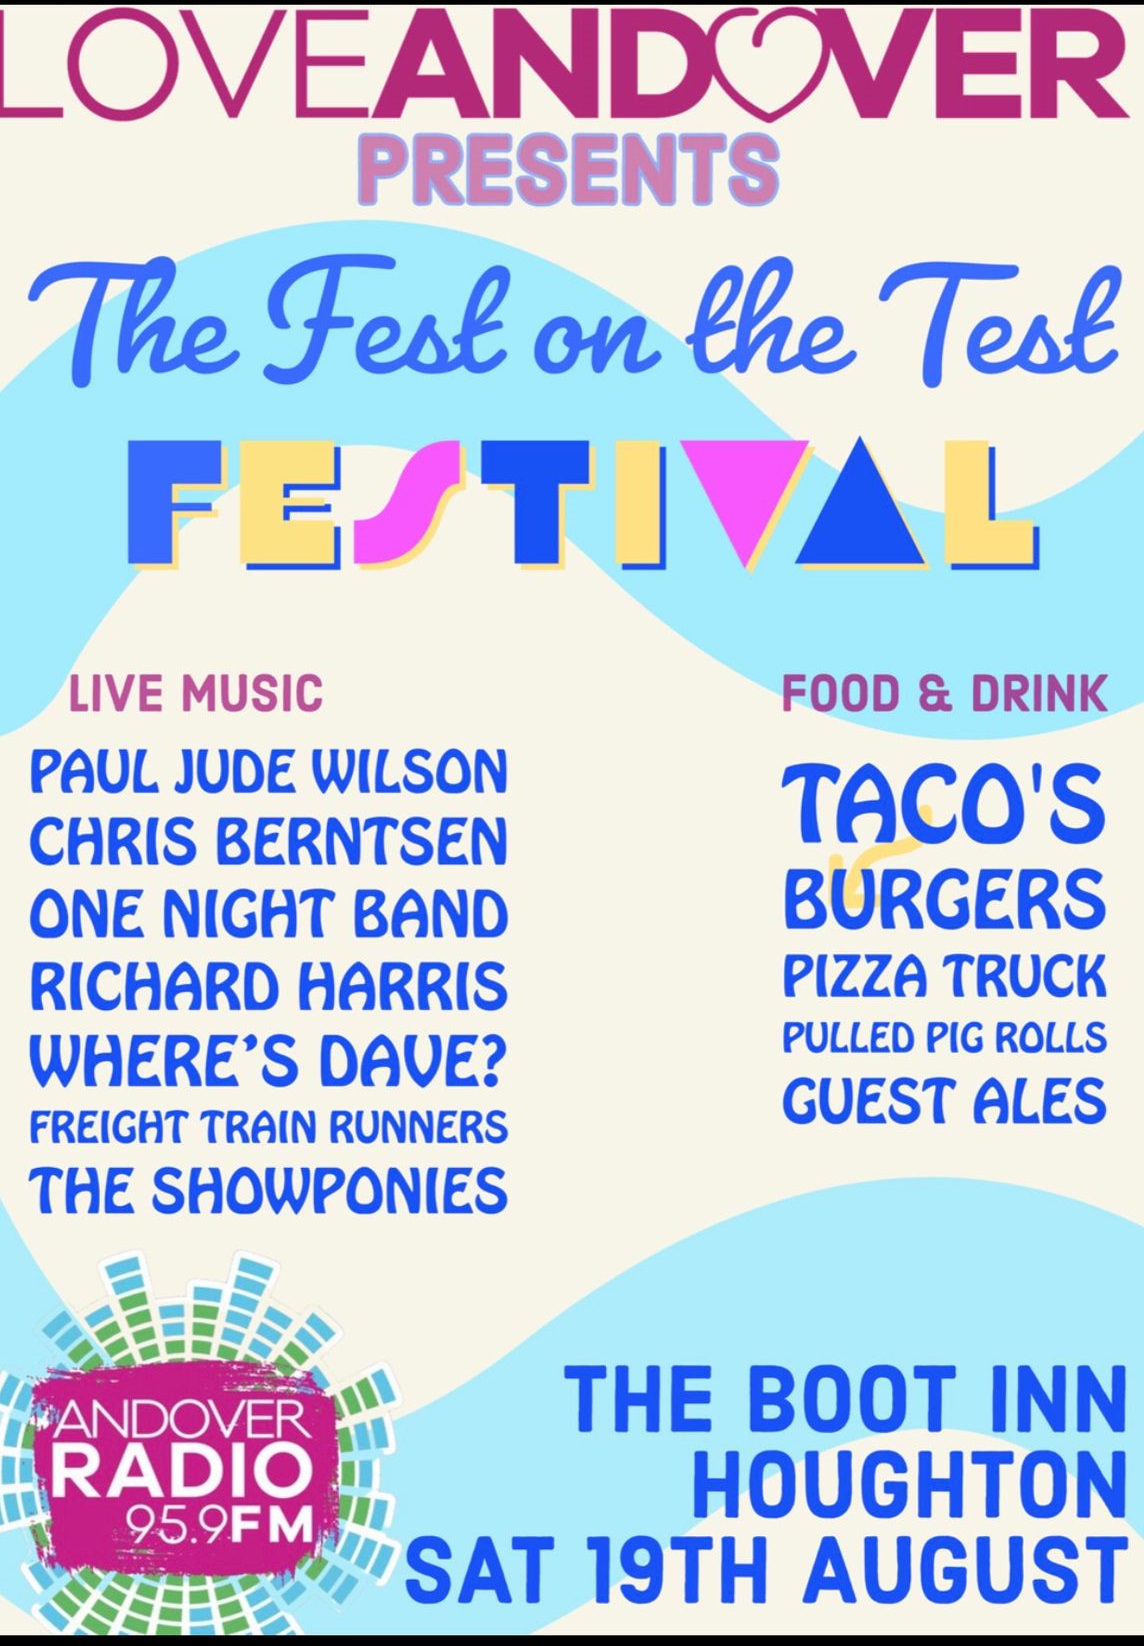 LoveAndover presents: The Fest on the Test Festival: Paul Jude Wilson + Chris Berntsen + One Night Band + Richard Harris + Where's Dave? + Freight Train Runners + The Showponies